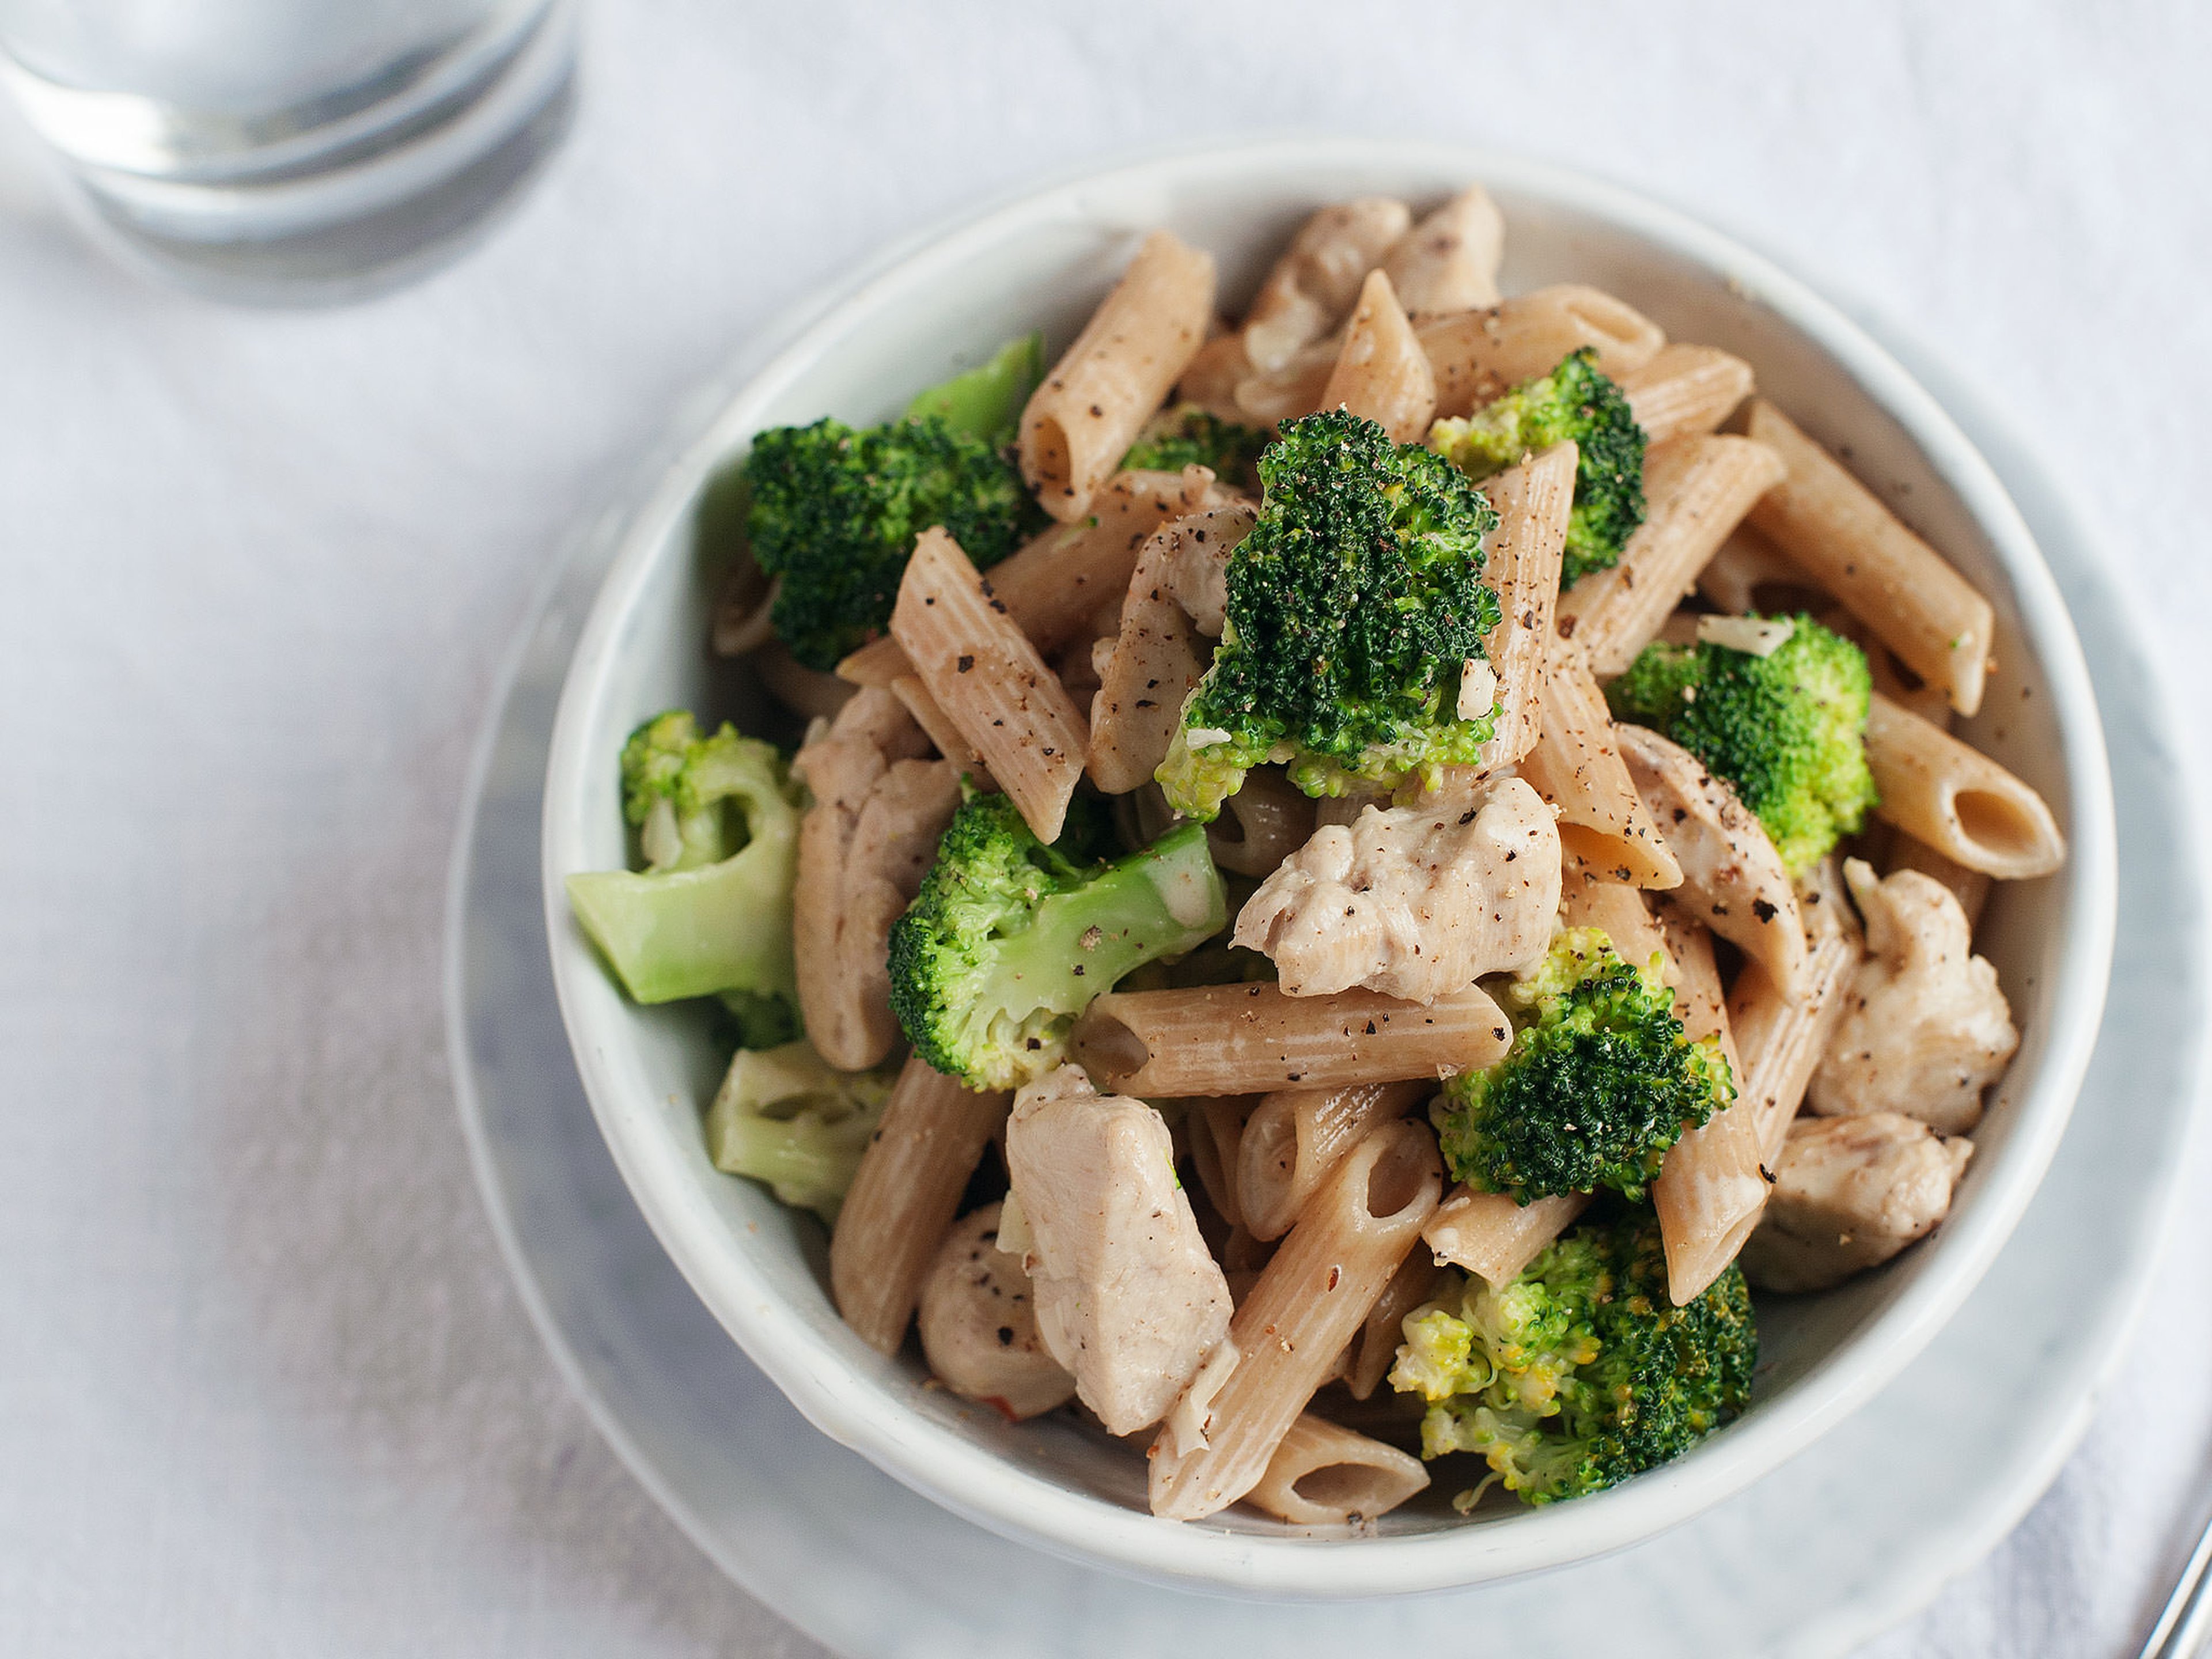 Creamy whole wheat pasta with chicken